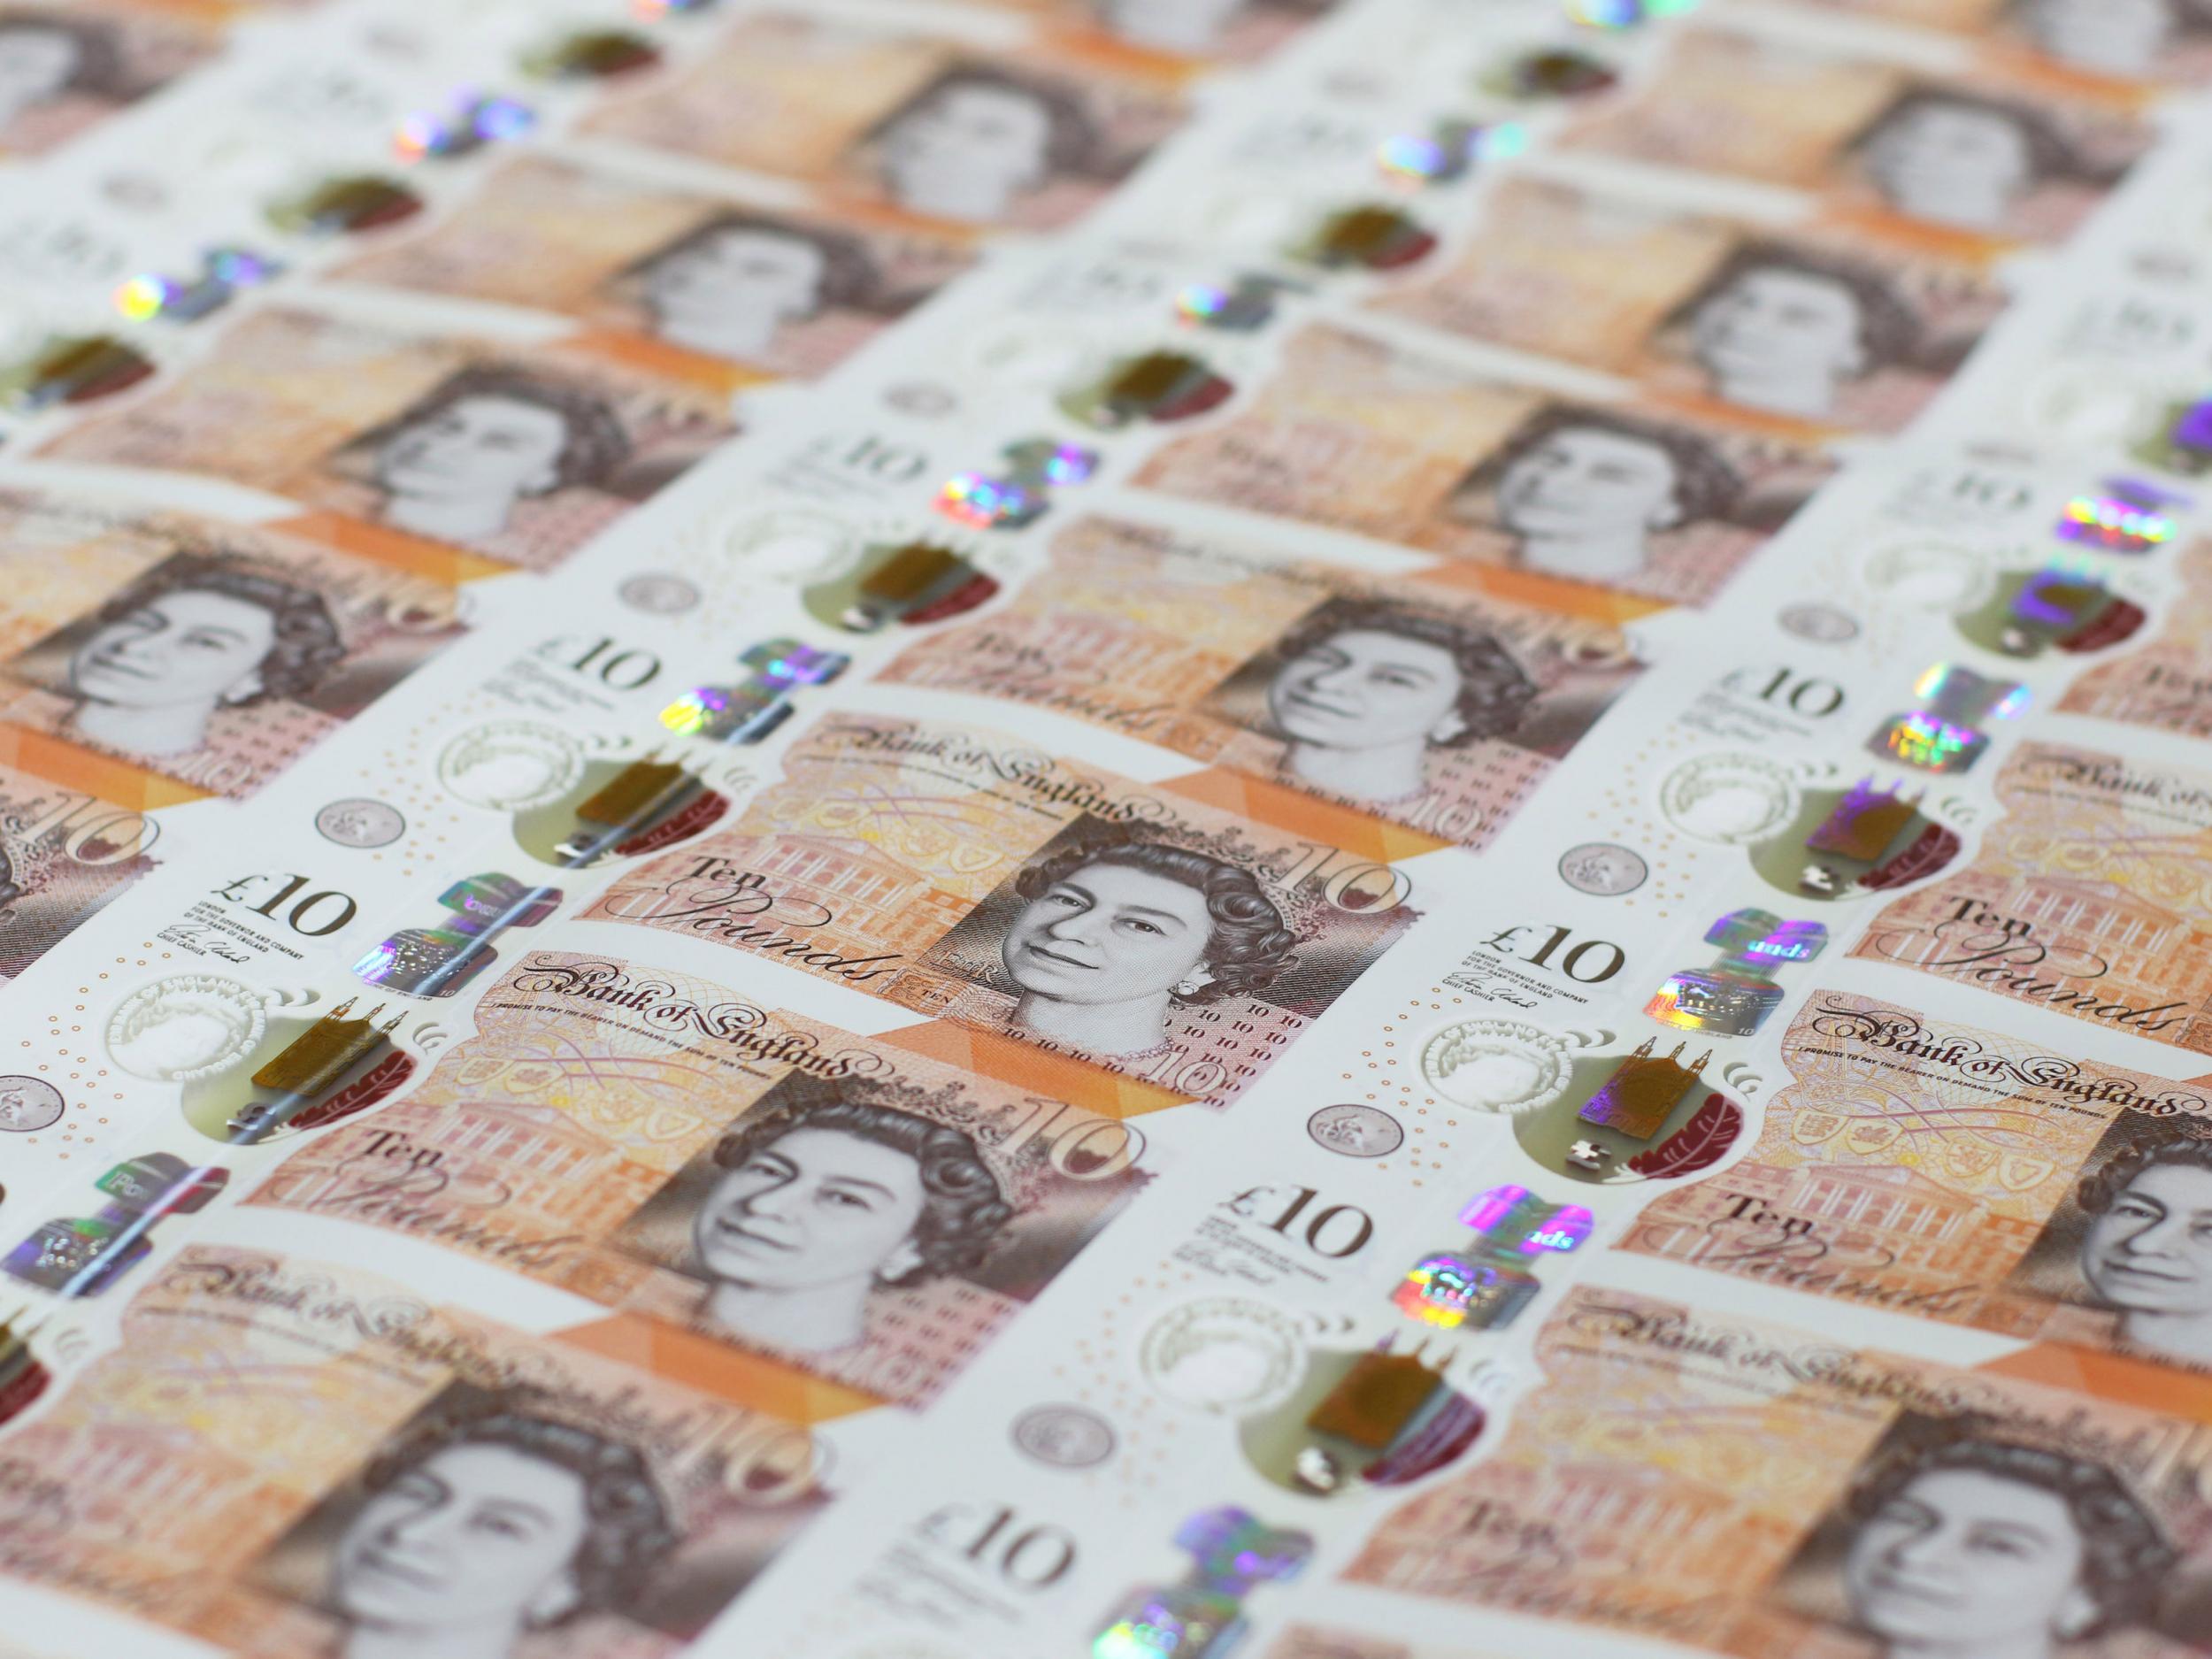 The old notes must be spent by 1 March, after which shops will no longer have to accept them